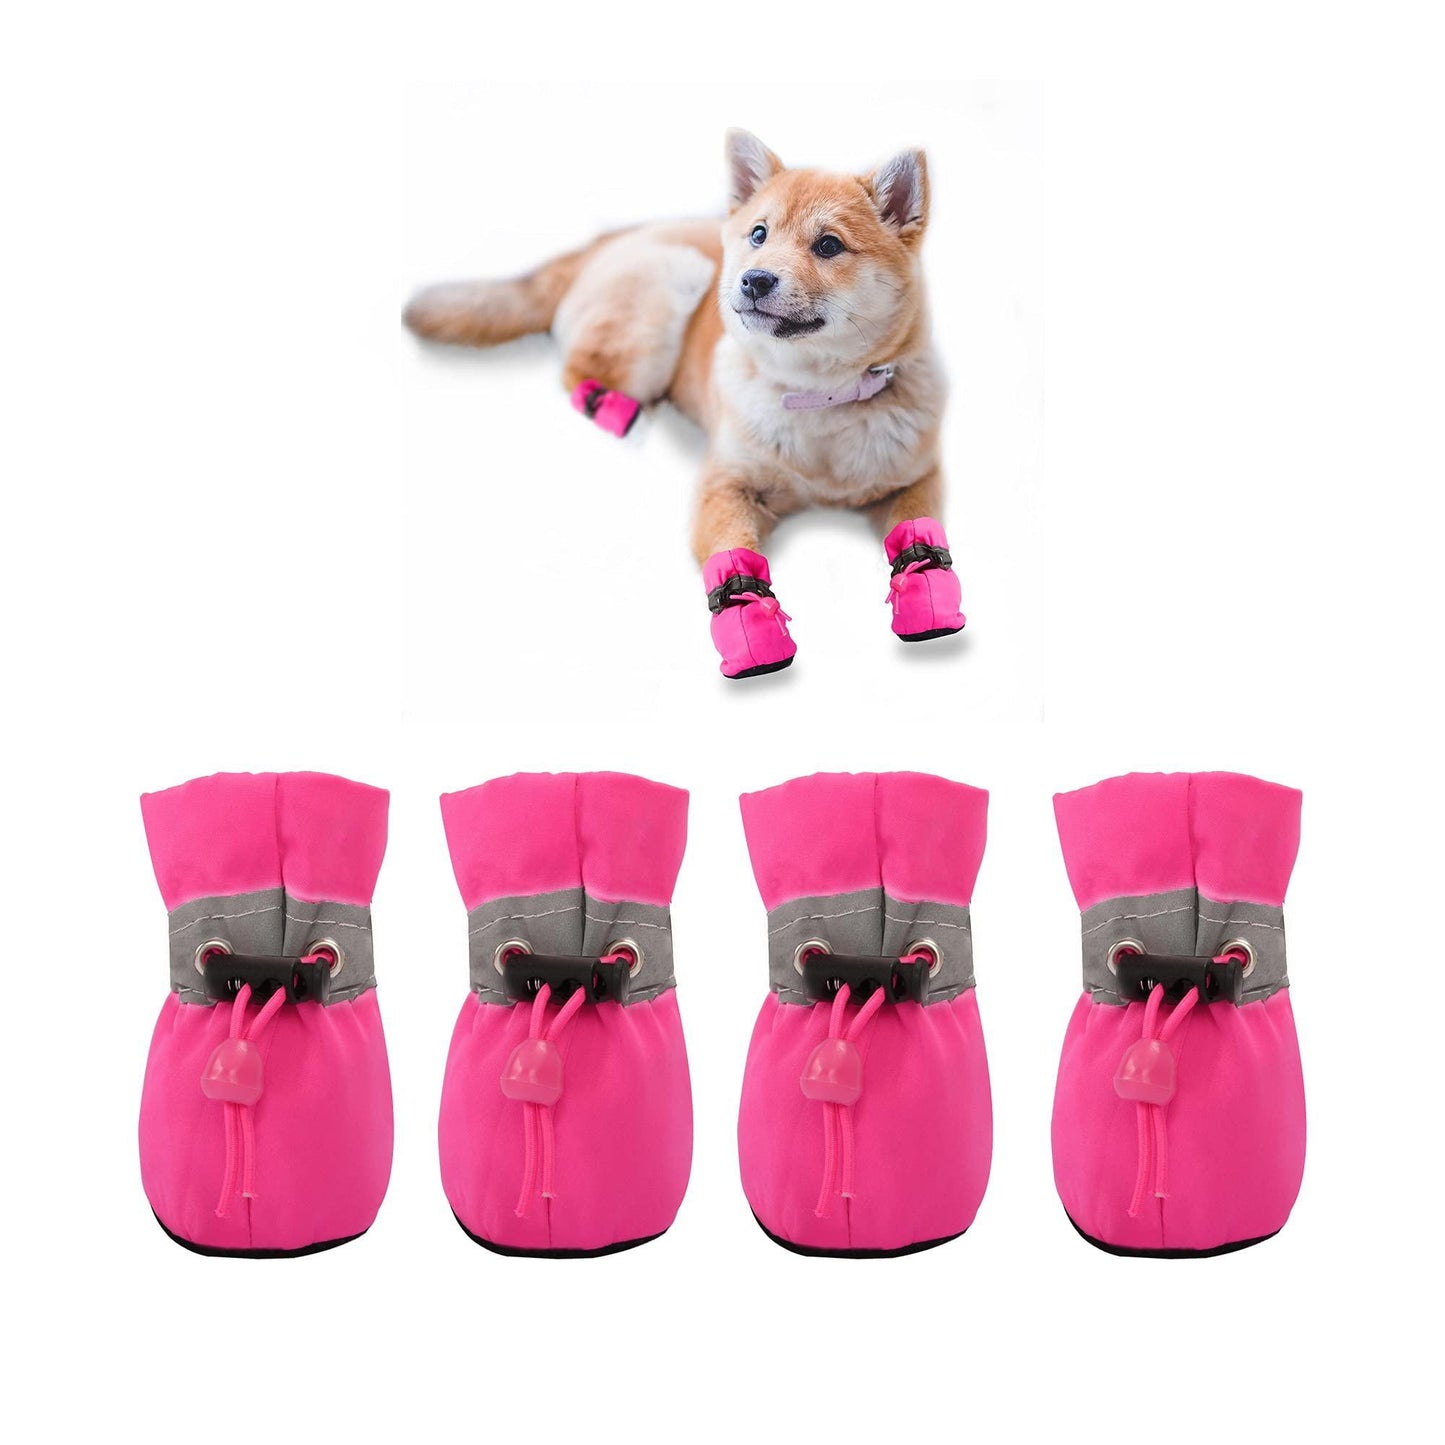 Protector with Reflective Strap Anti-Slip Dogs Boot 4PCS - iTalkPet